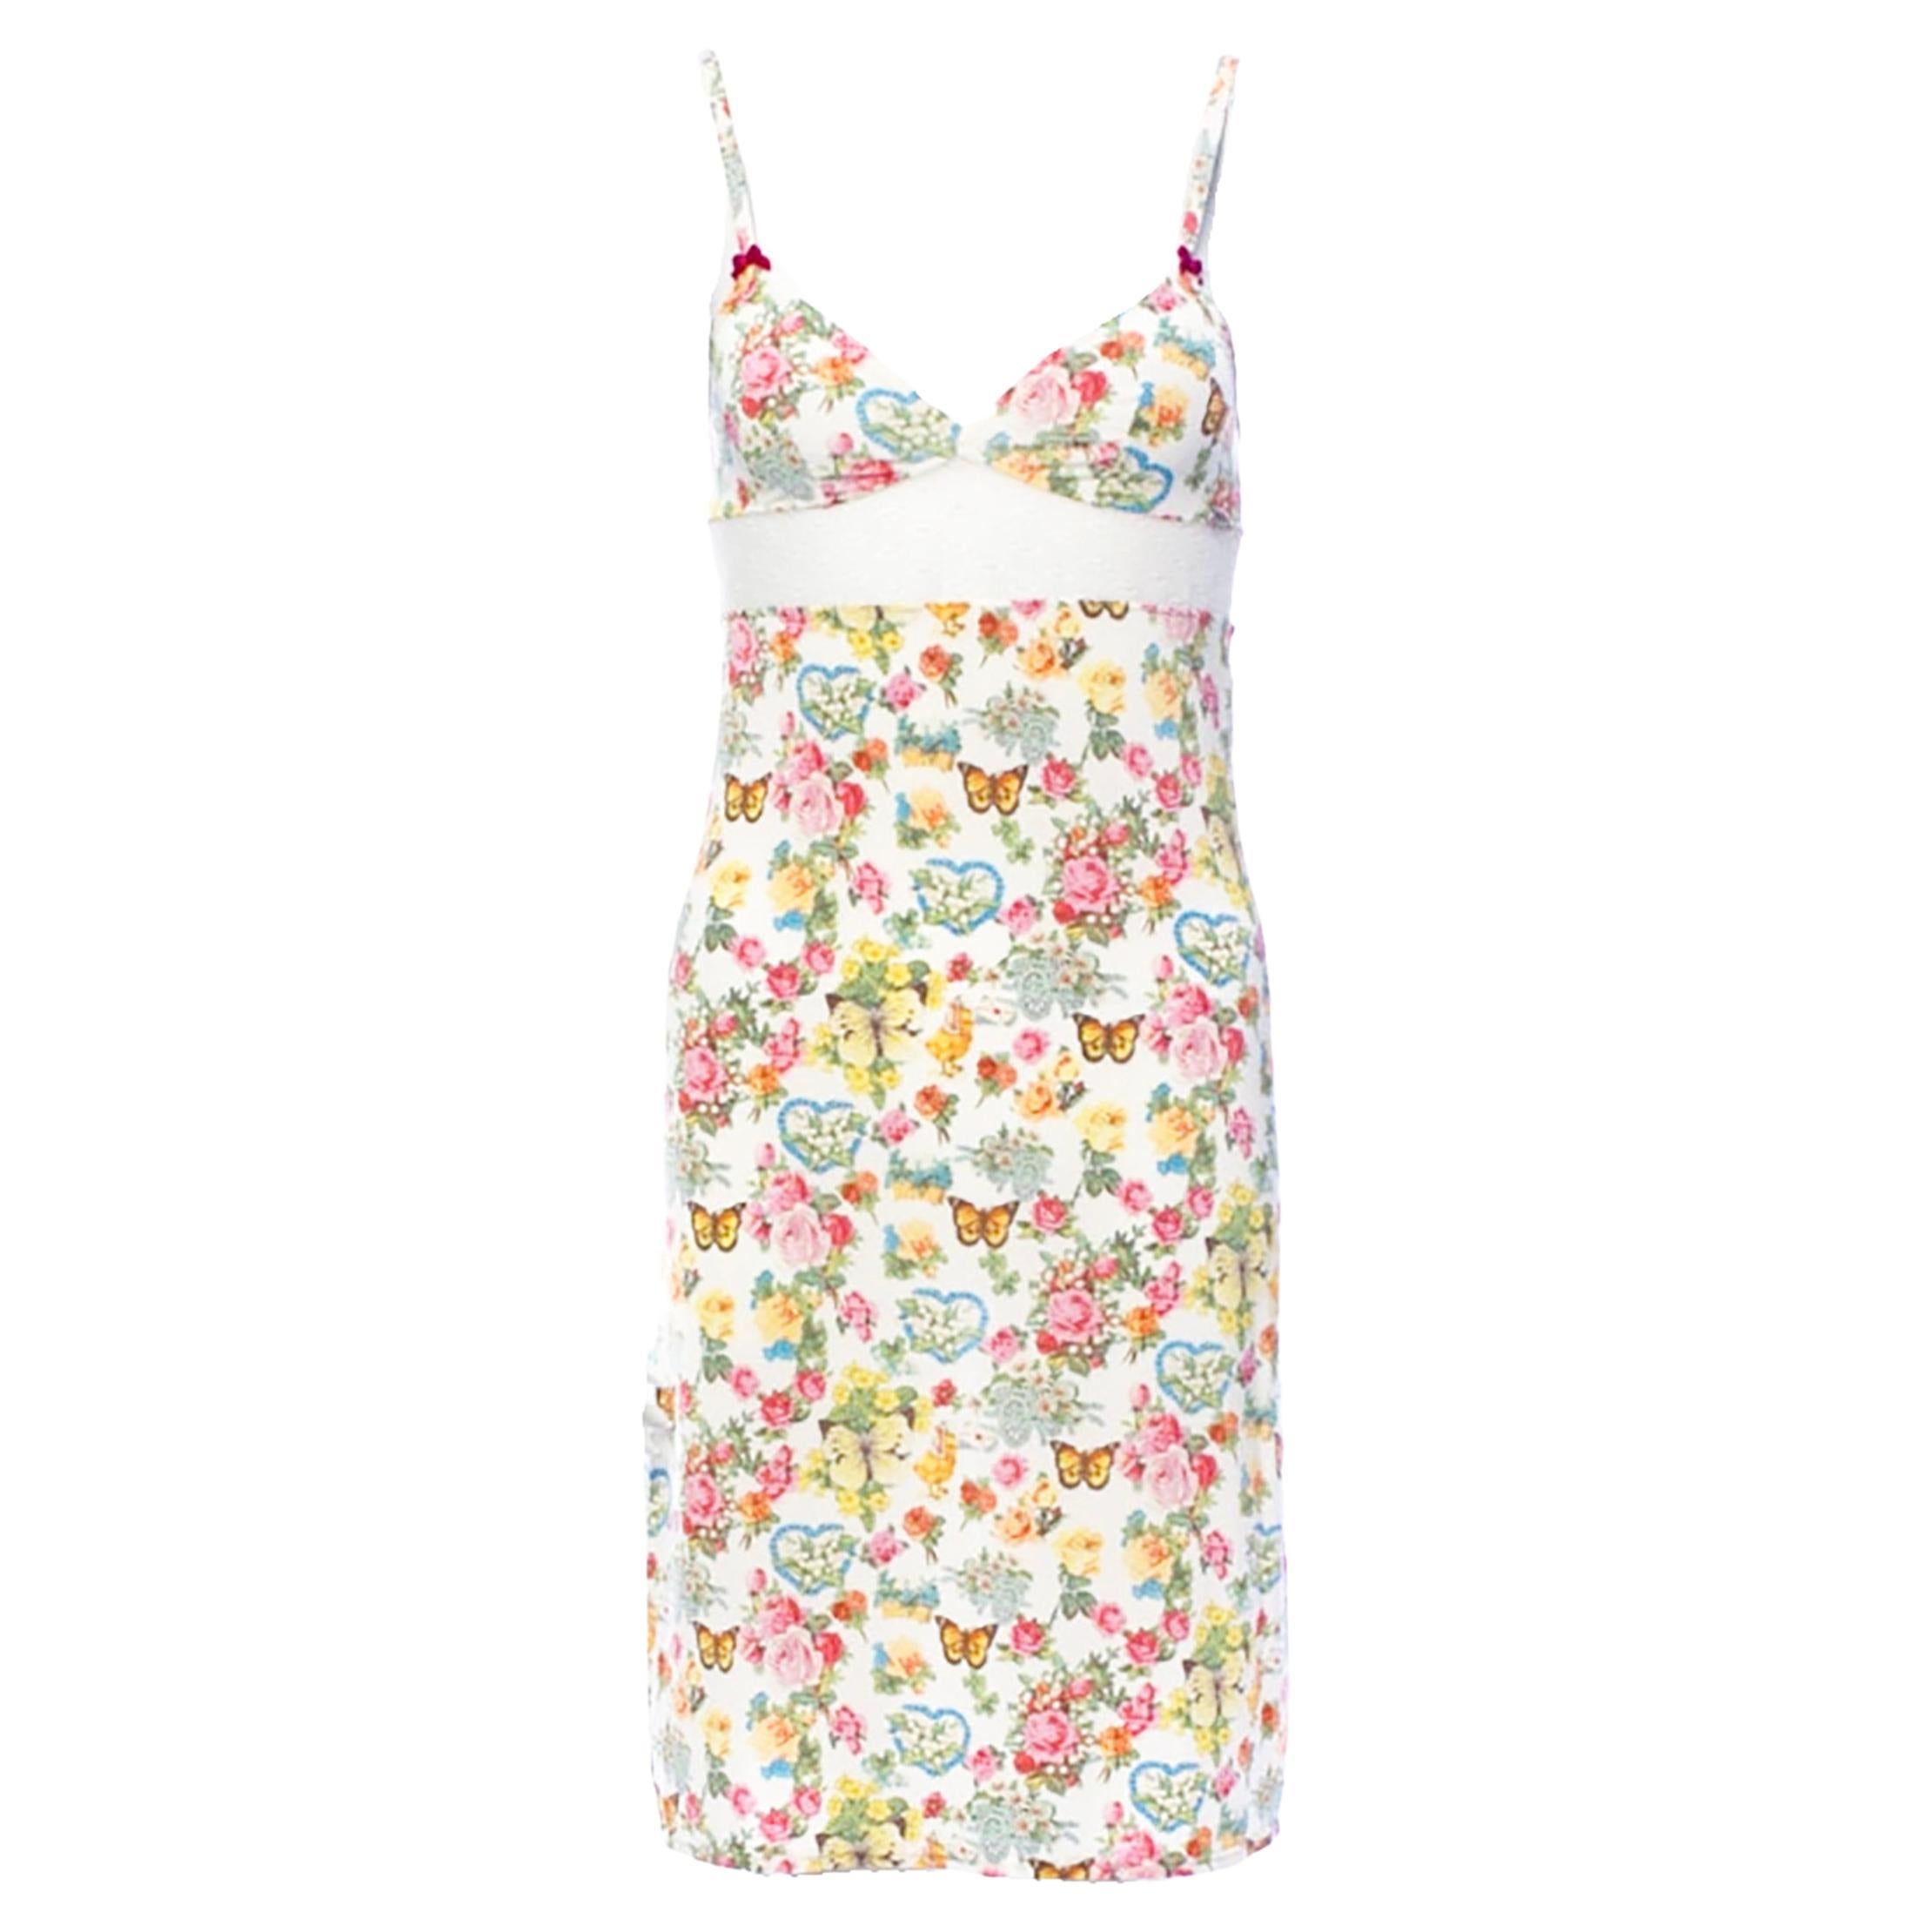 Christian Dior Floral Slip Dress with Lace Insert